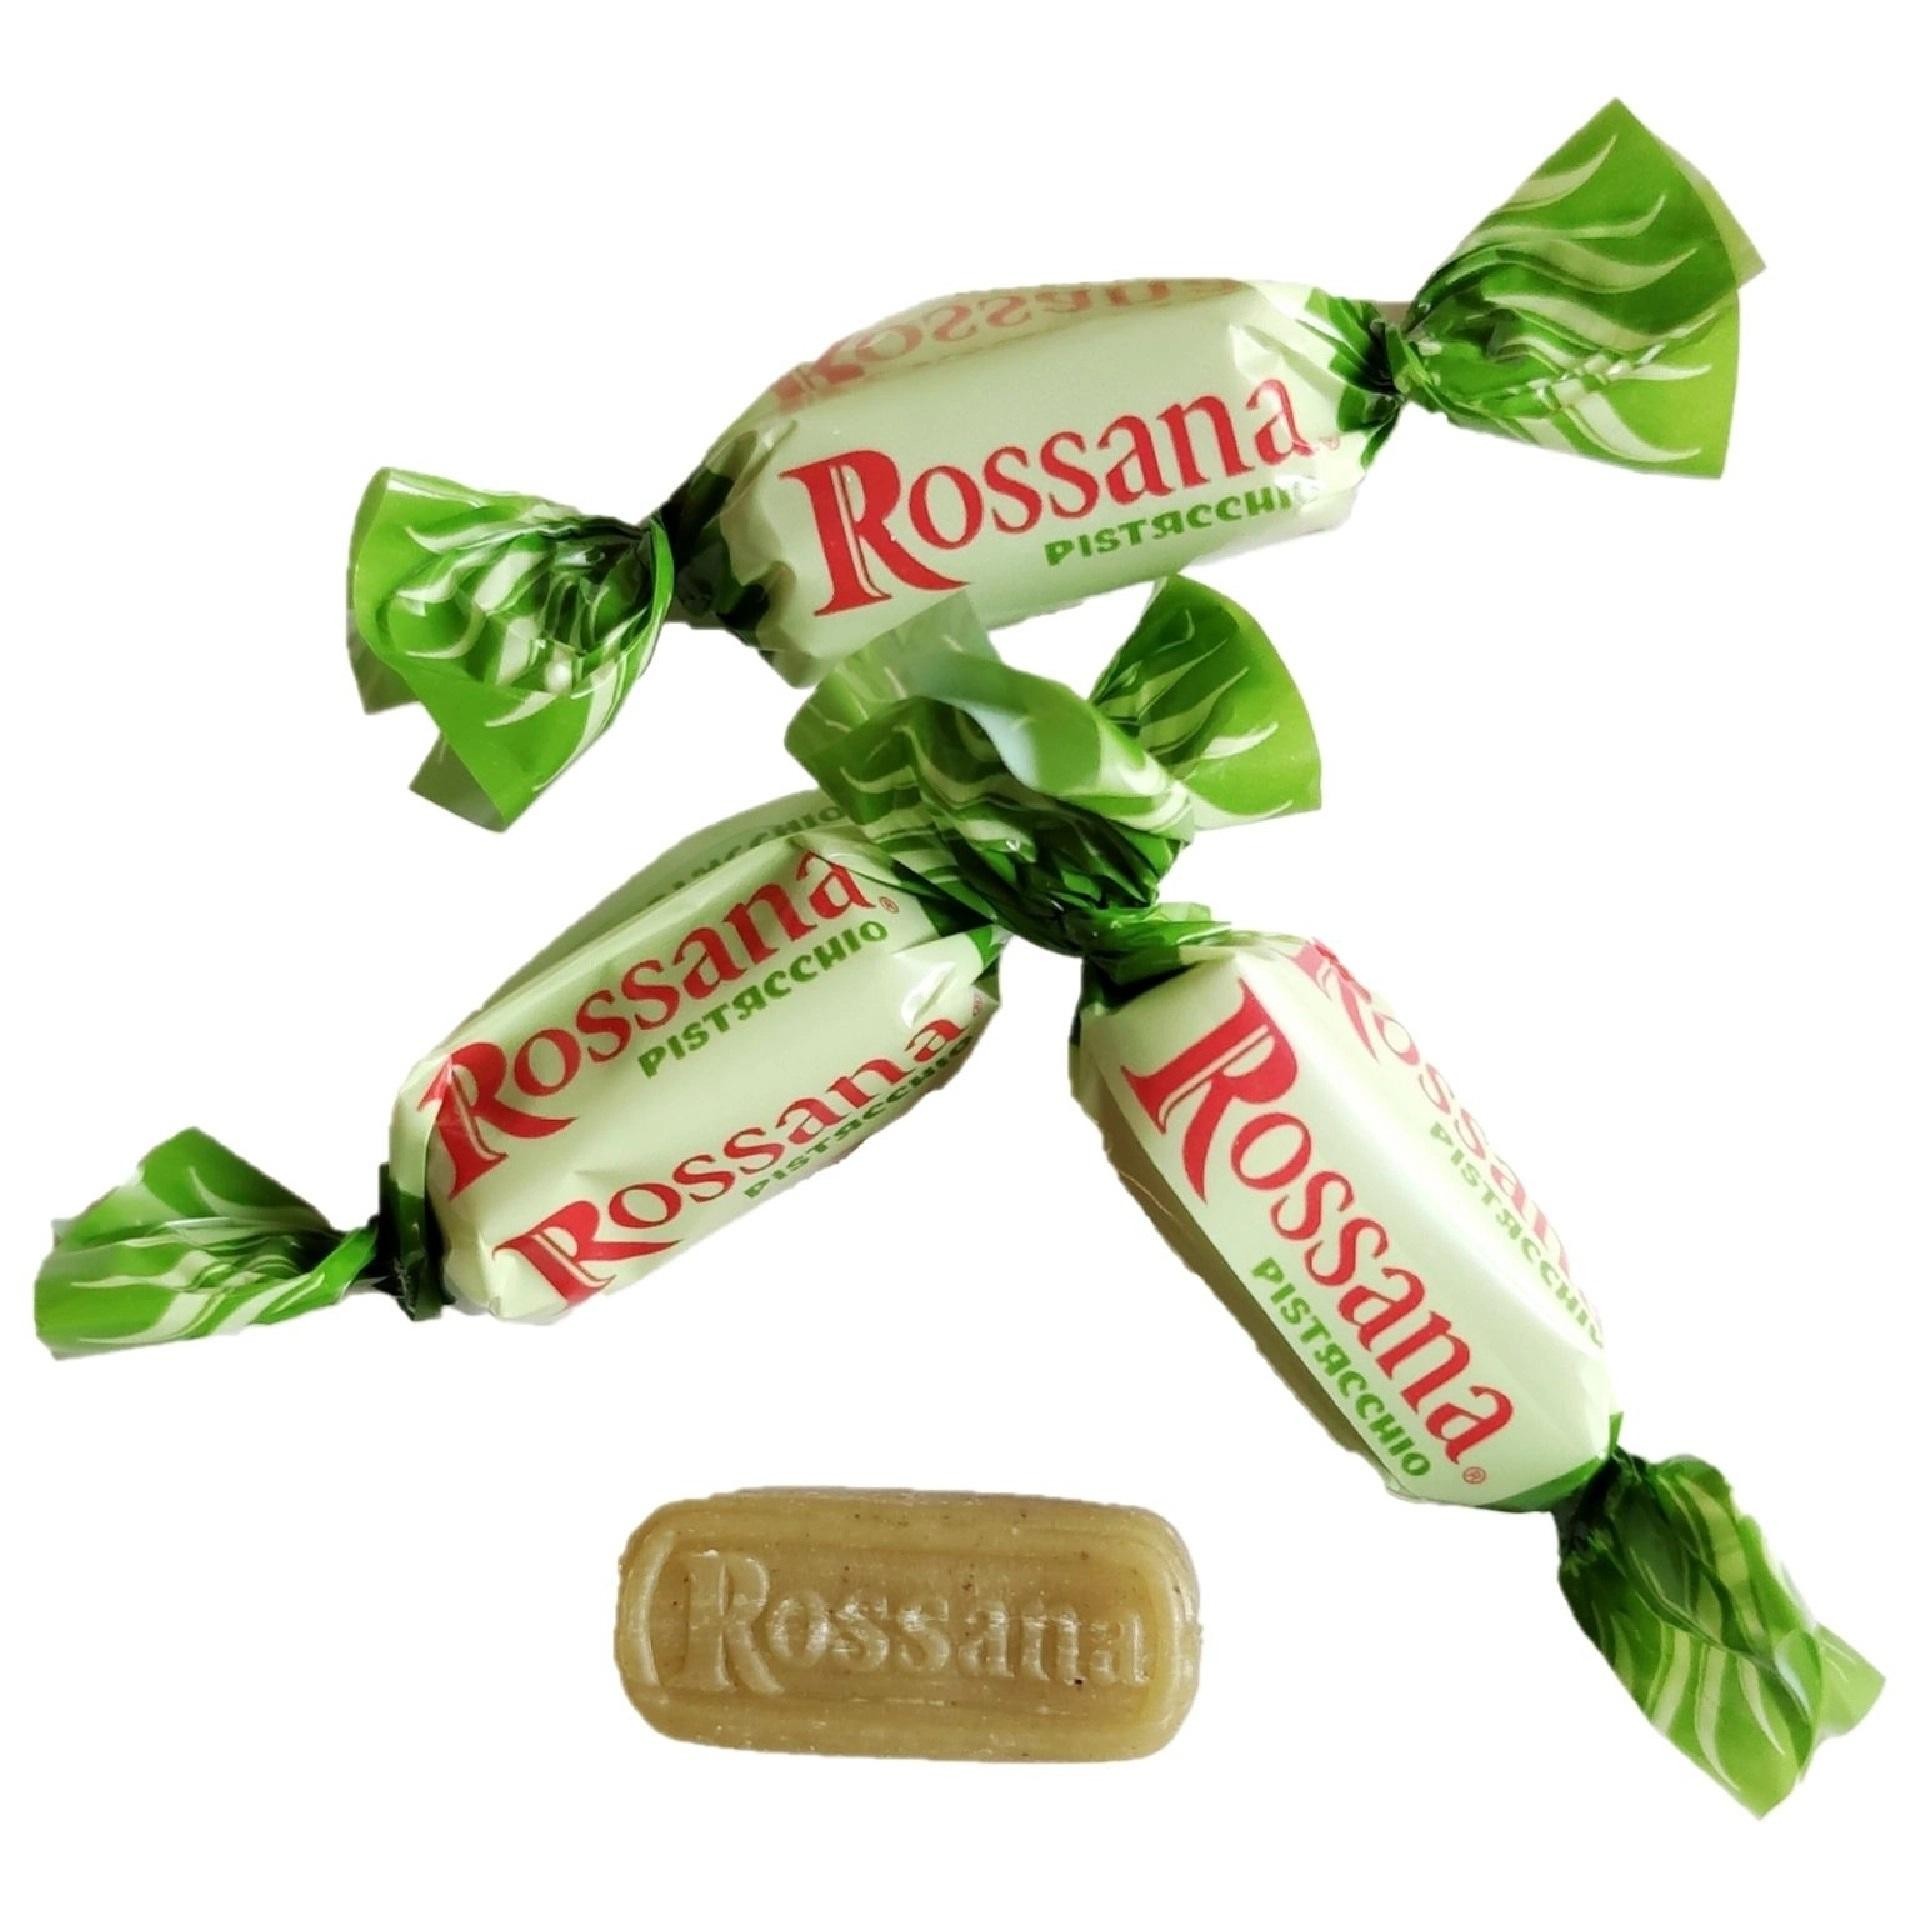 Pistachio filled Rossana candy